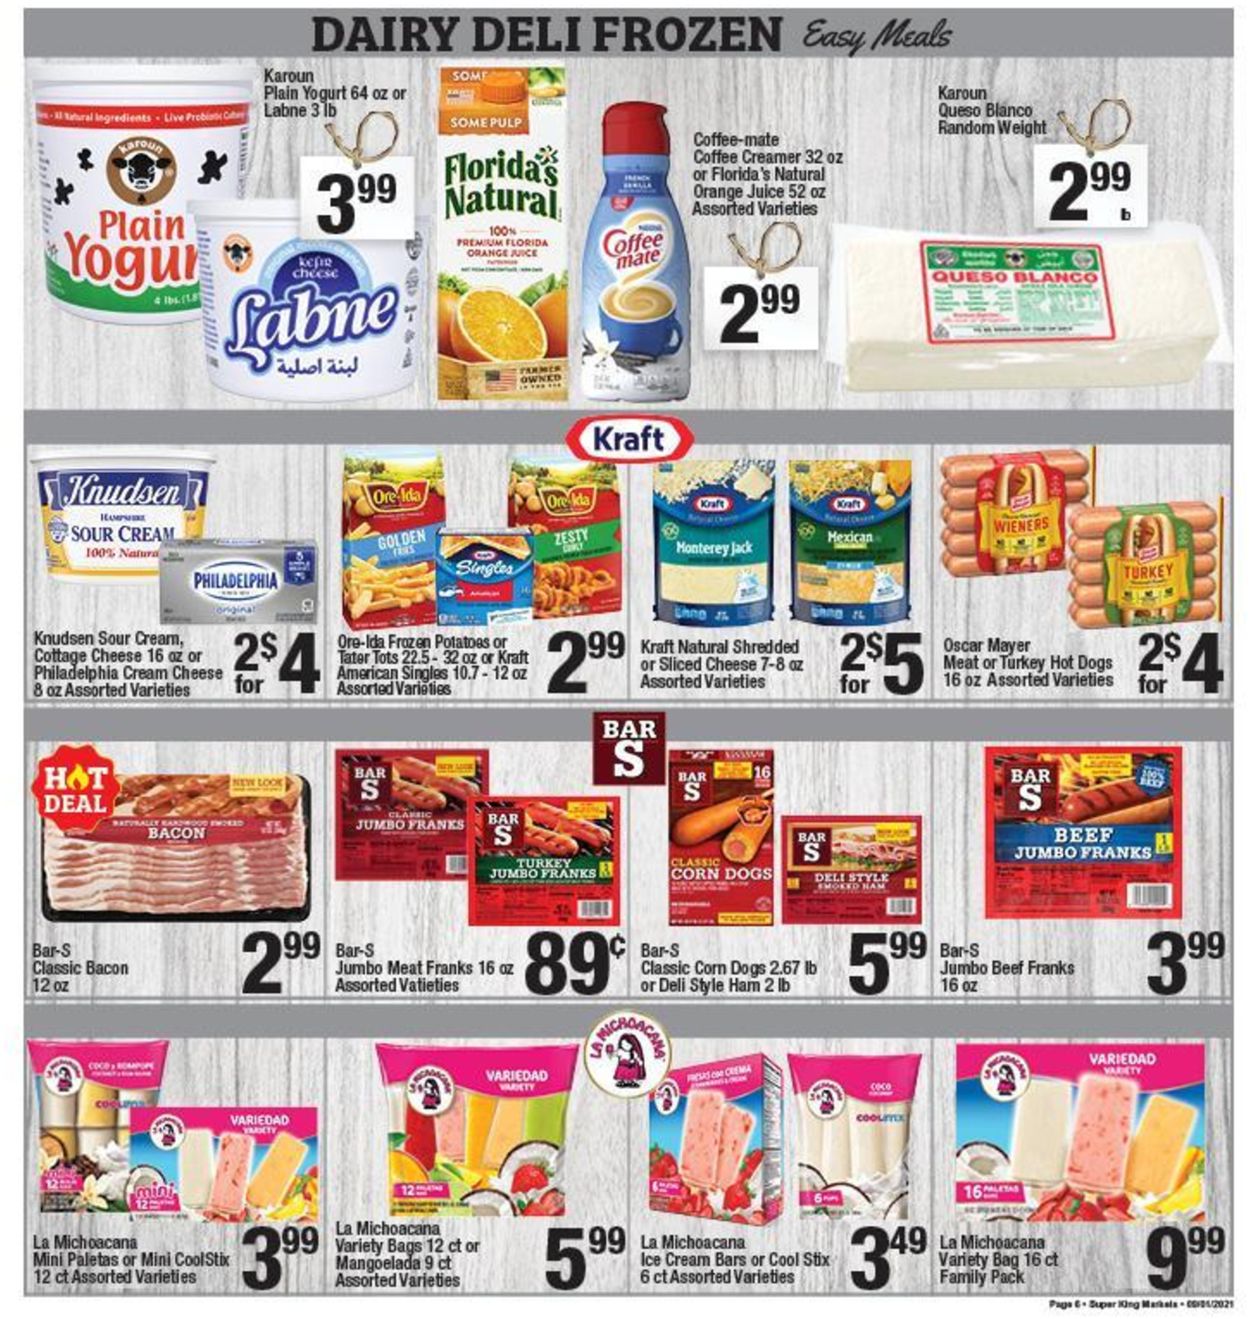 Super King Market Ad from 09/01/2021